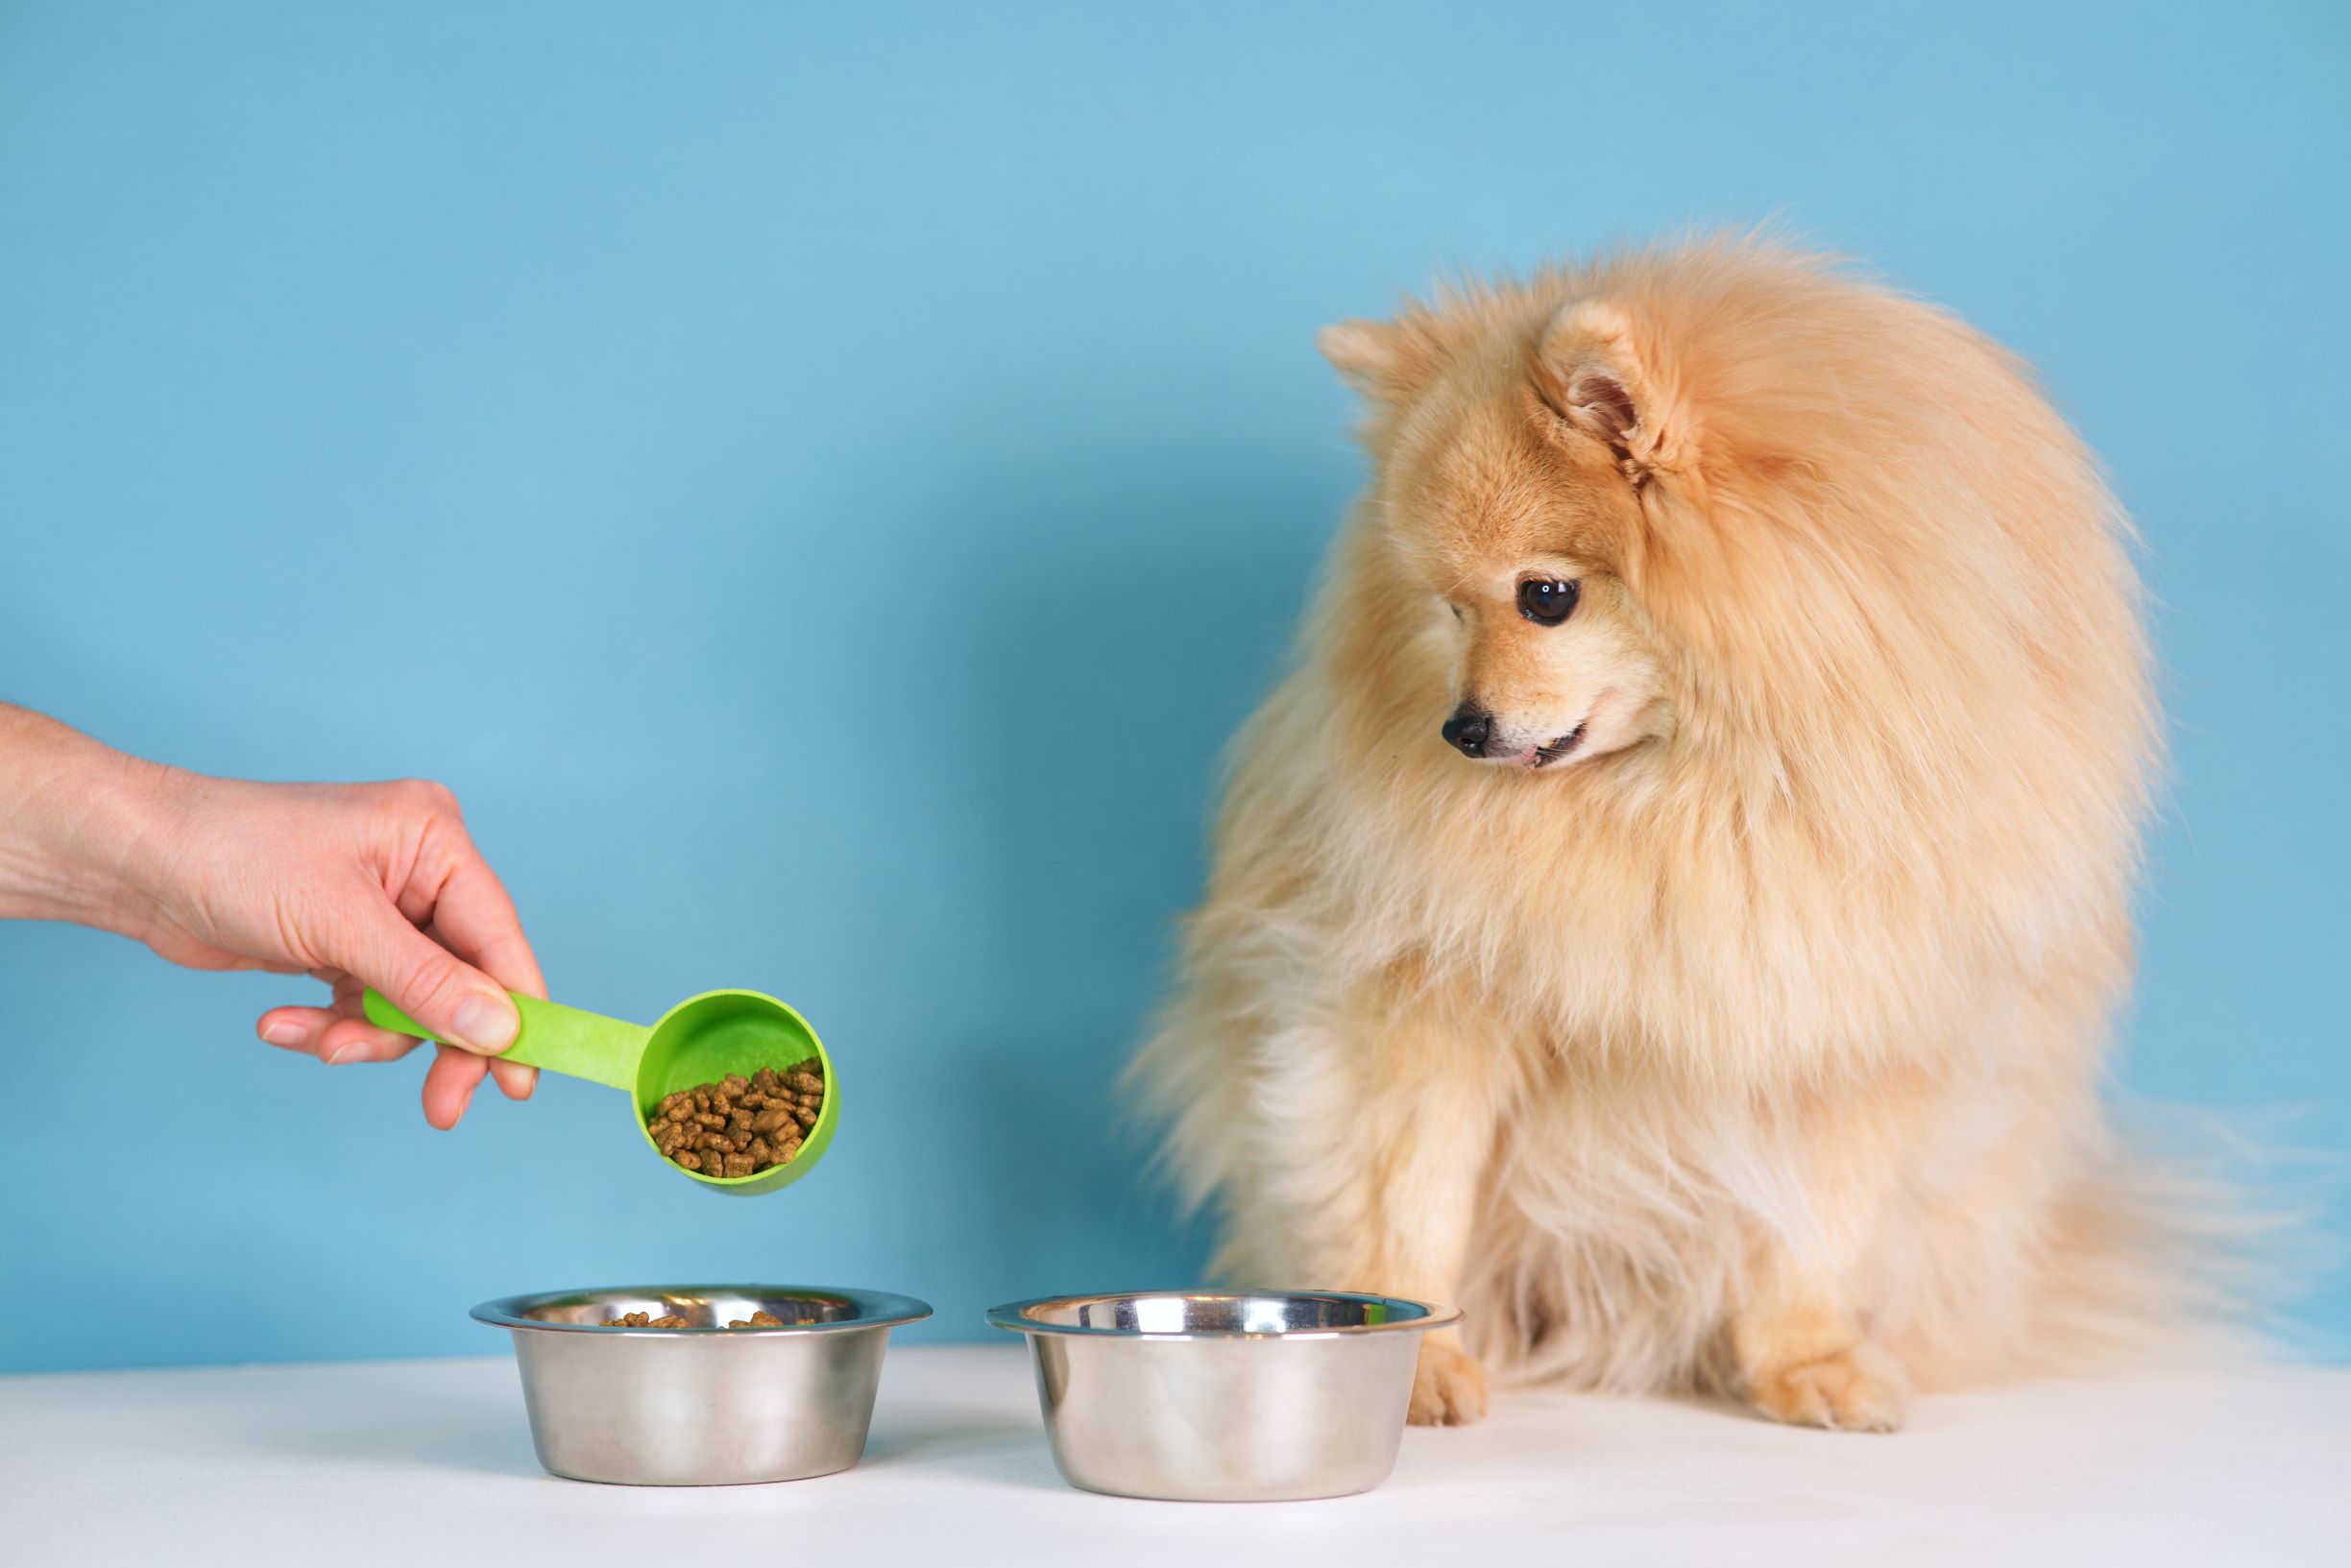 Probiotics are good for dogs